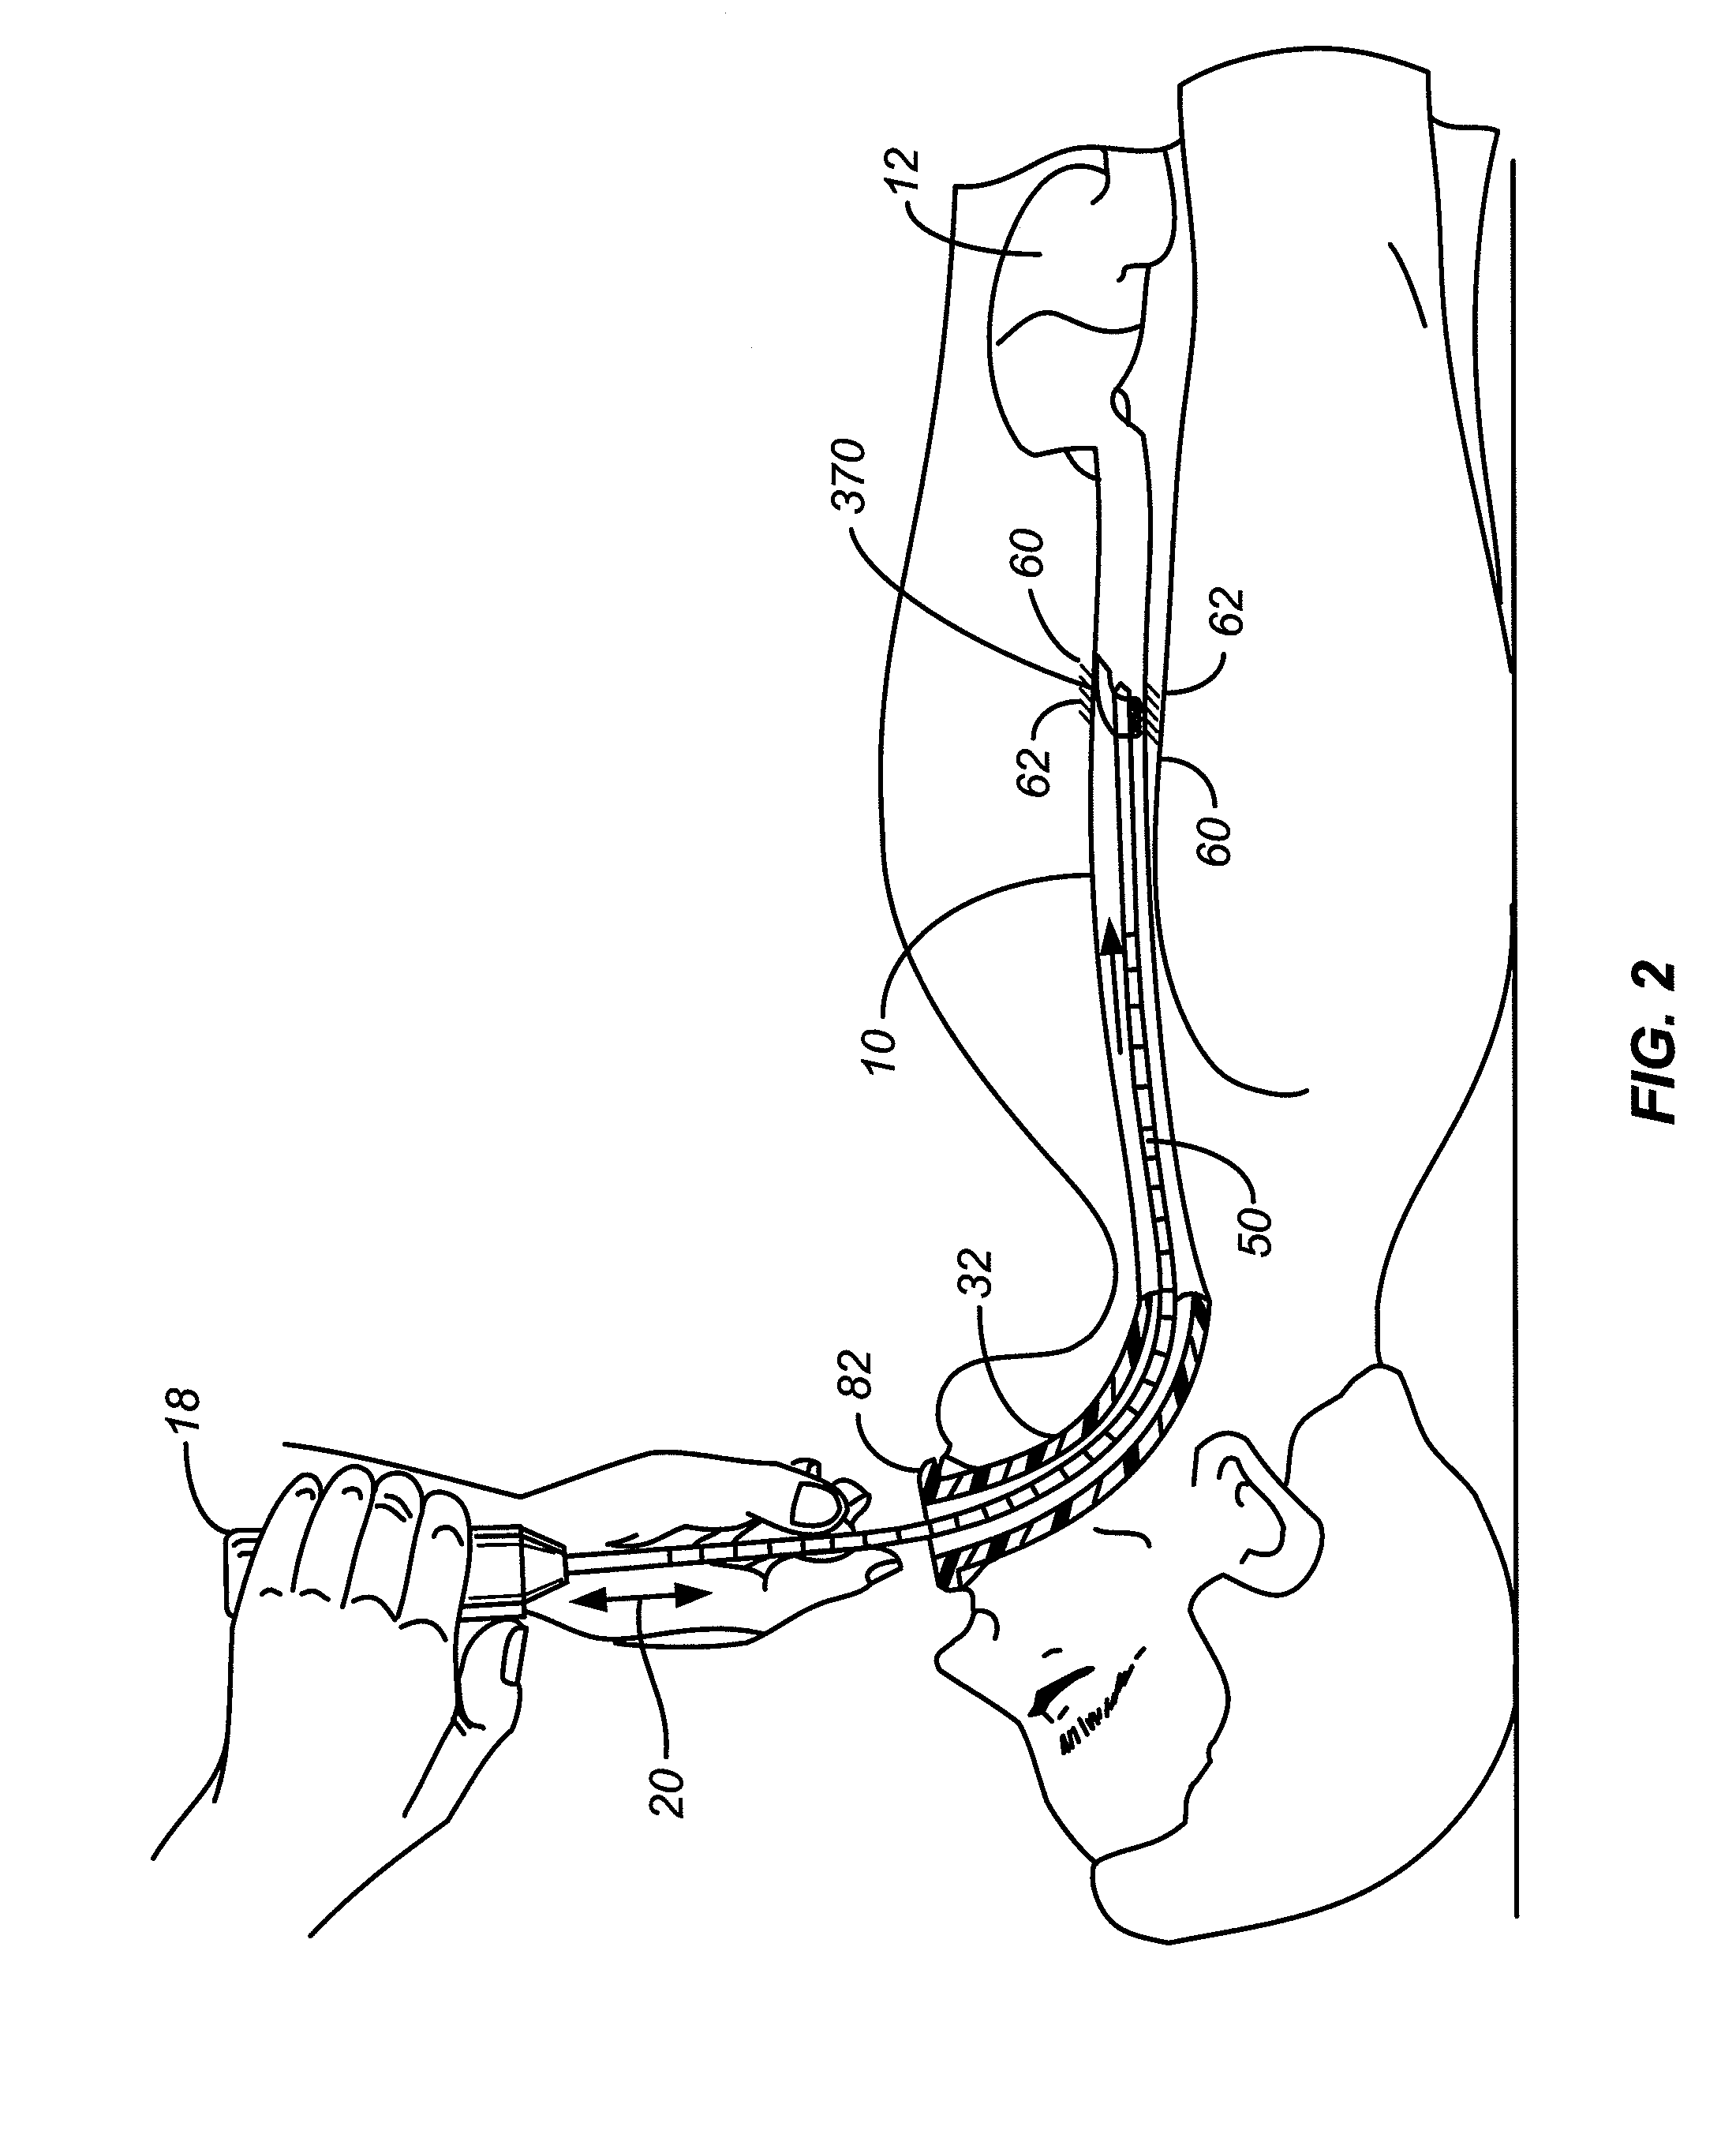 Cleaning device and methods